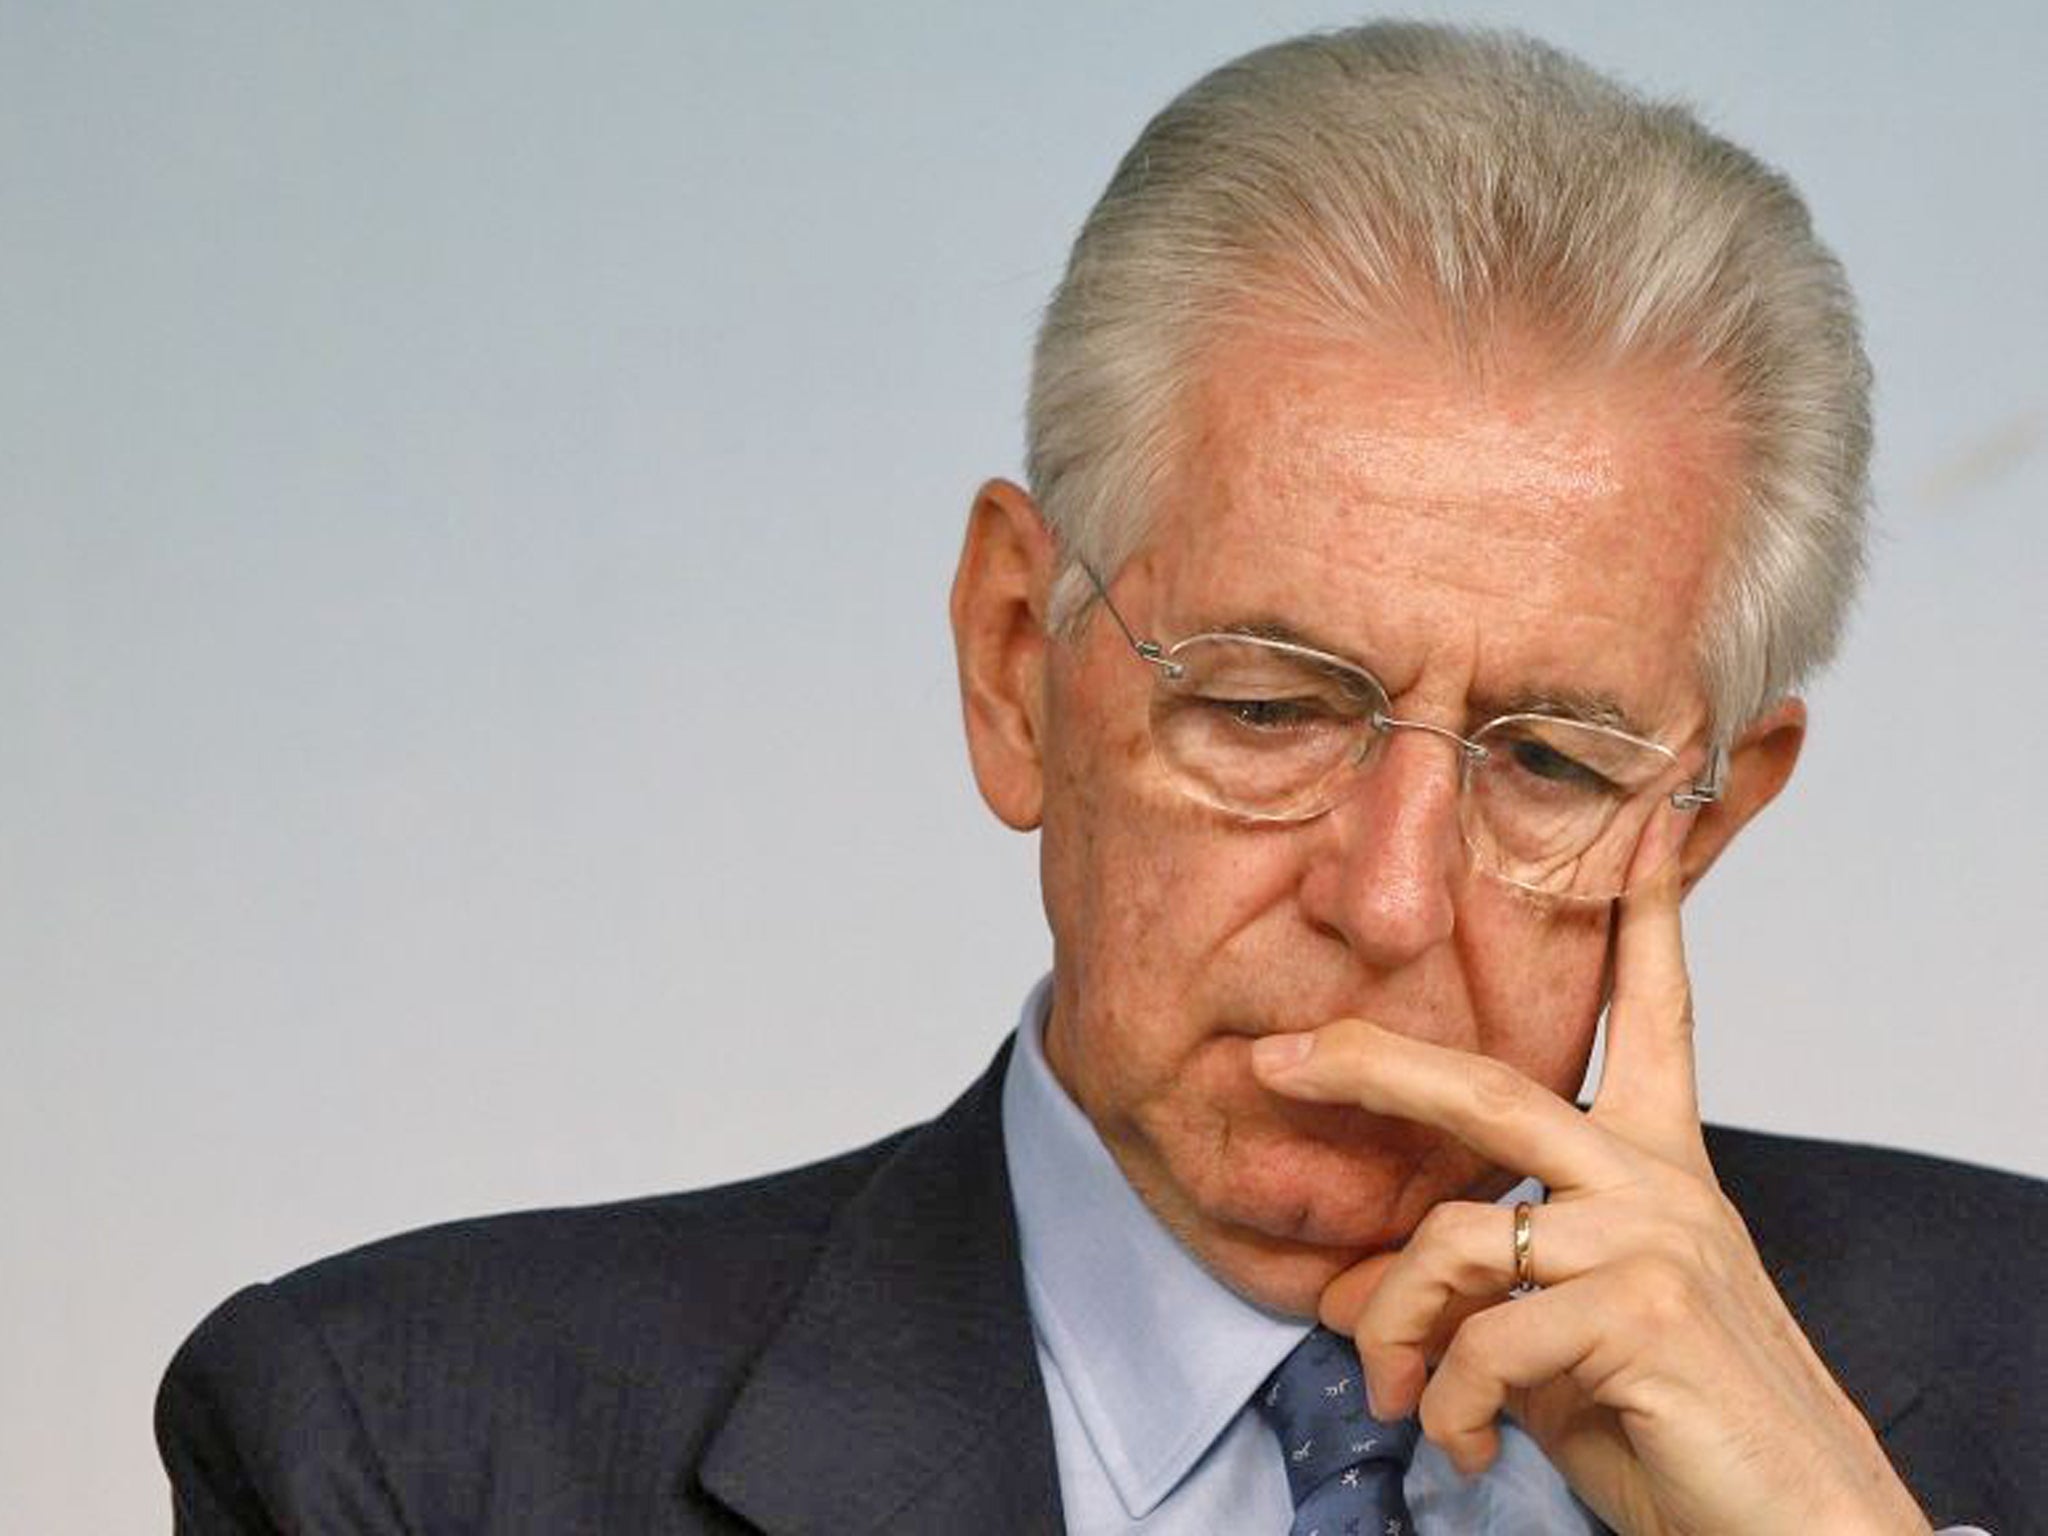 Mario Monti could have been tougher, Mrs Fornero said